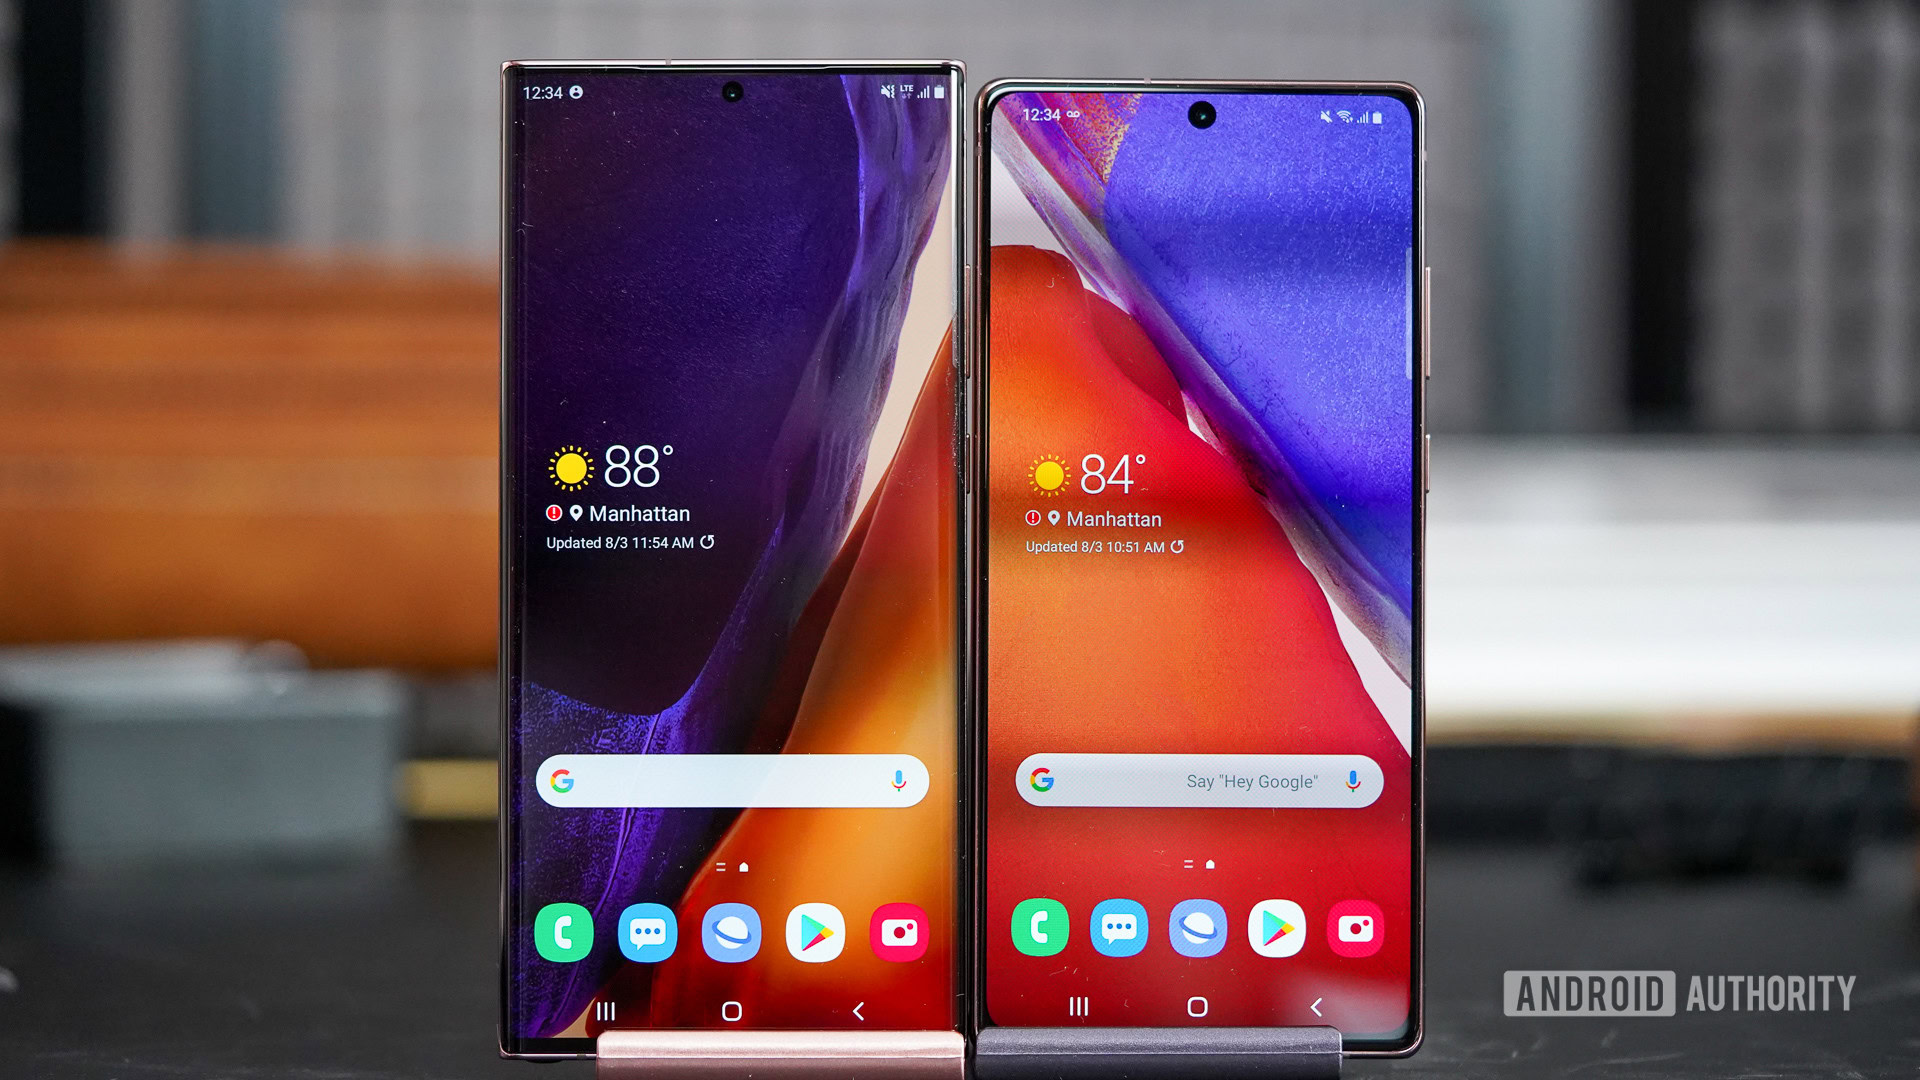 Galaxy Note 10+ vs. Galaxy Note 10: Which should you buy?